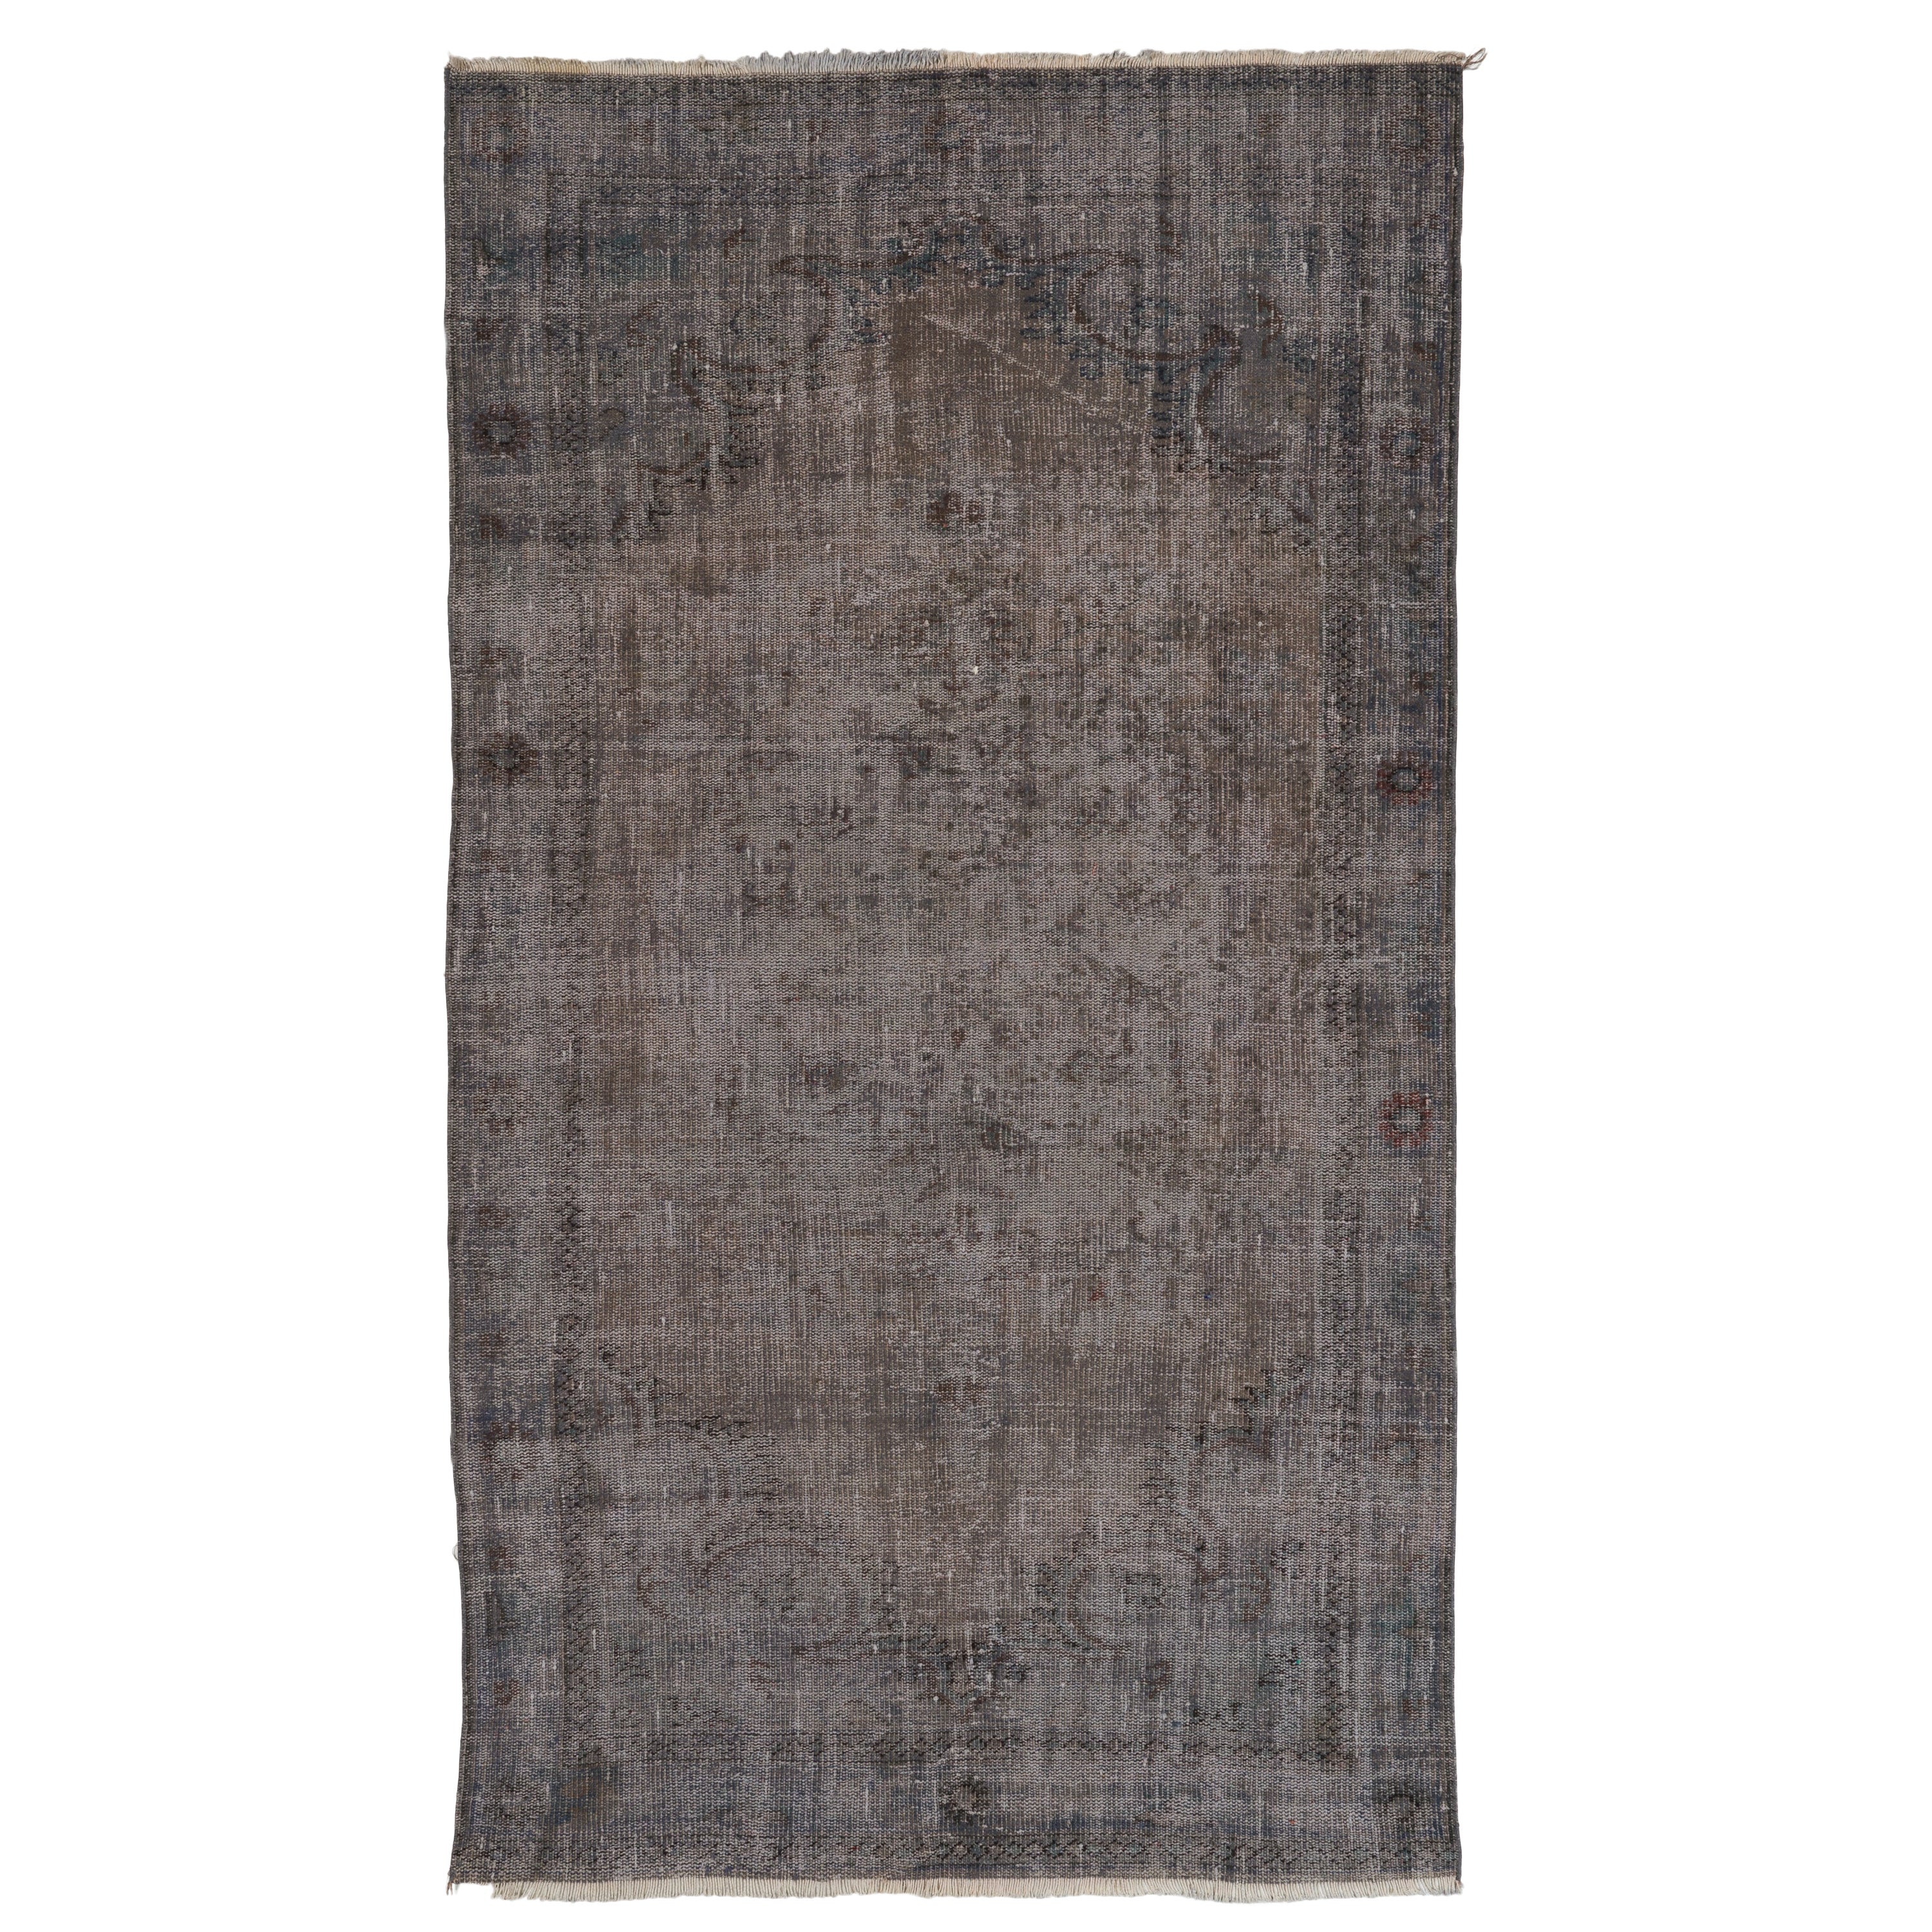 Handmade Shabby Chic Area Rug in Gray, Mid20th Century Turkish Carpet For Sale